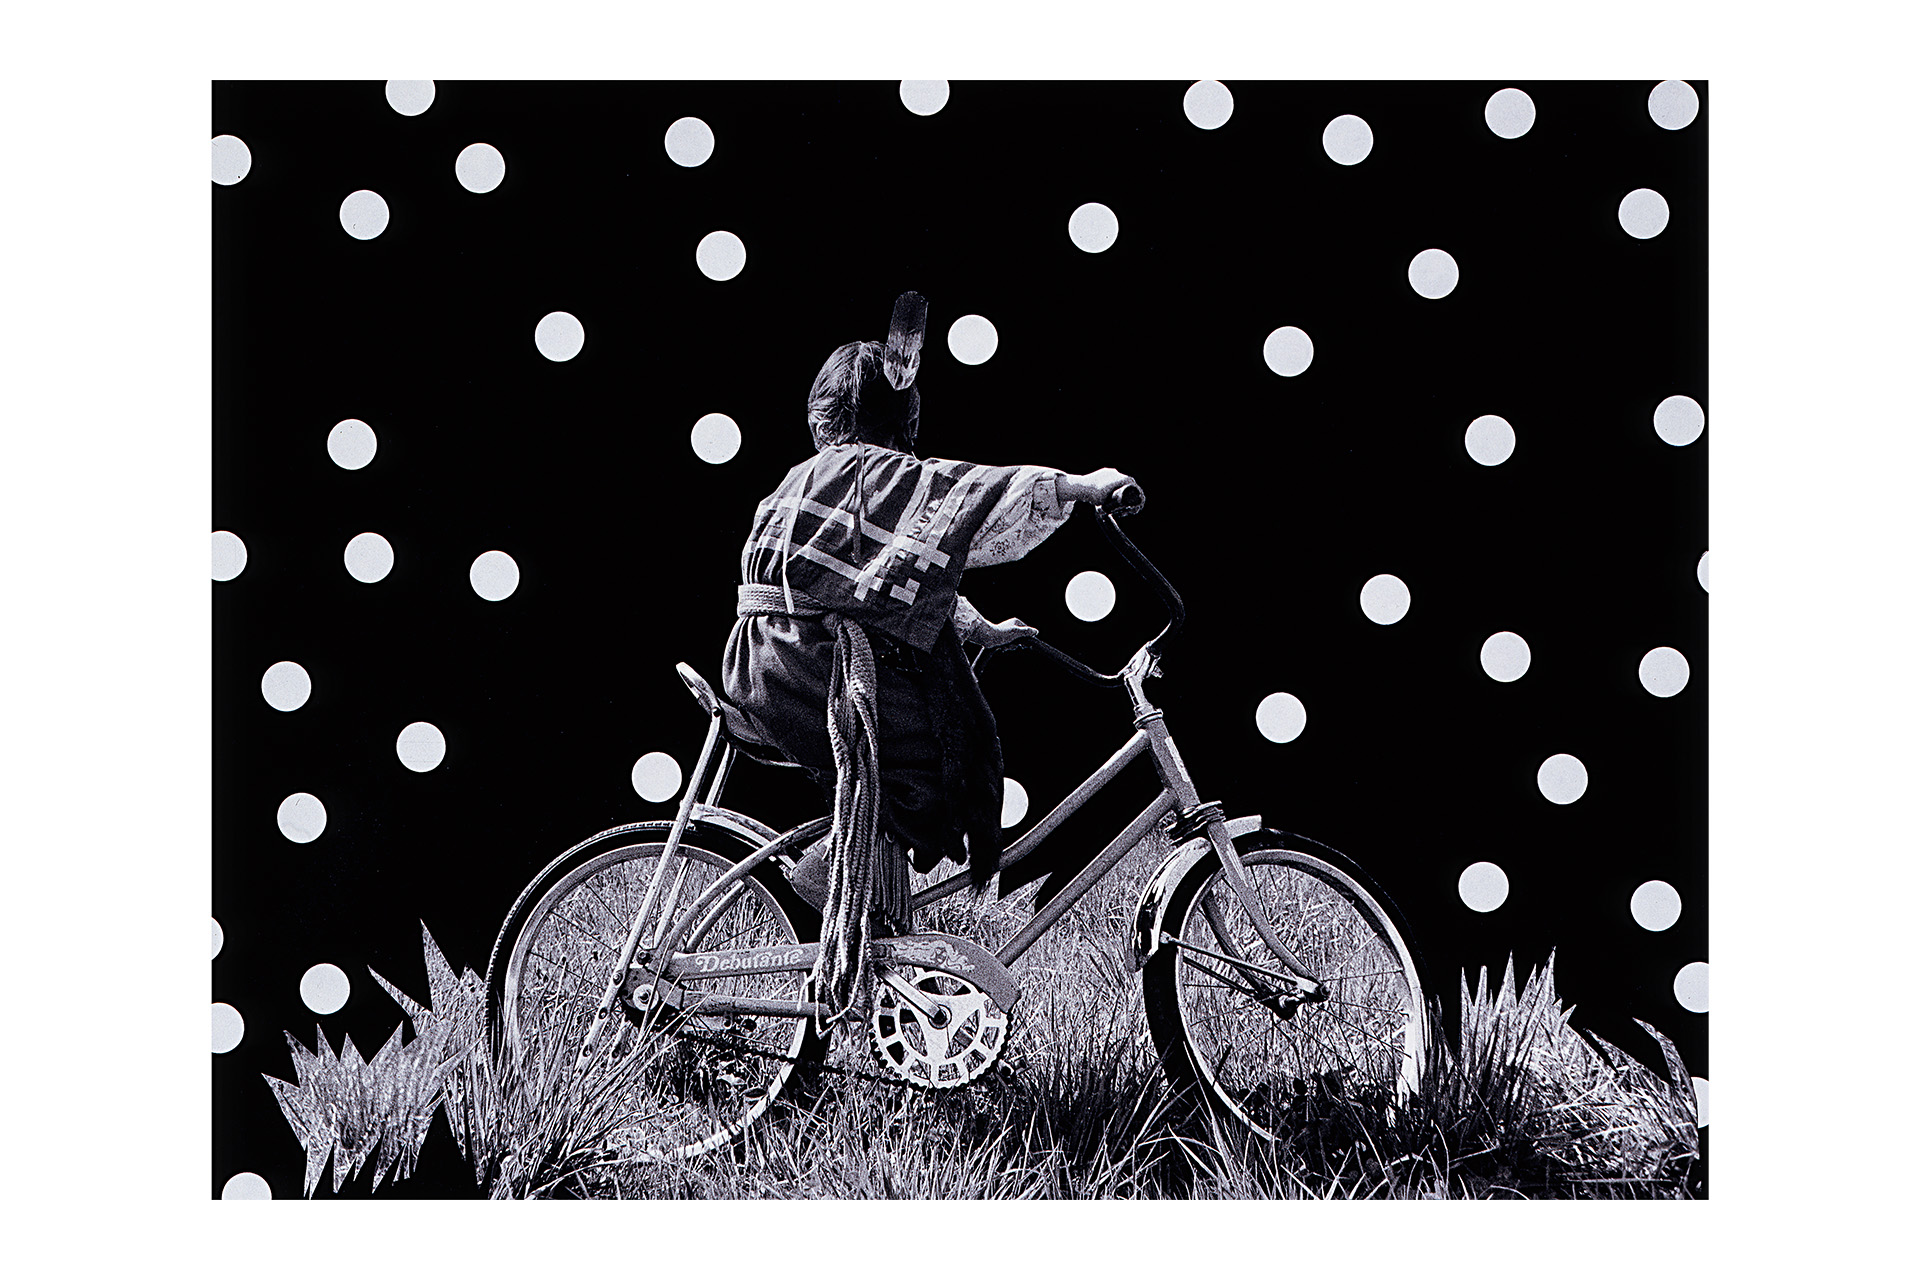 A black and white image of a person riding a bicycle with a black background that has while polka dots.